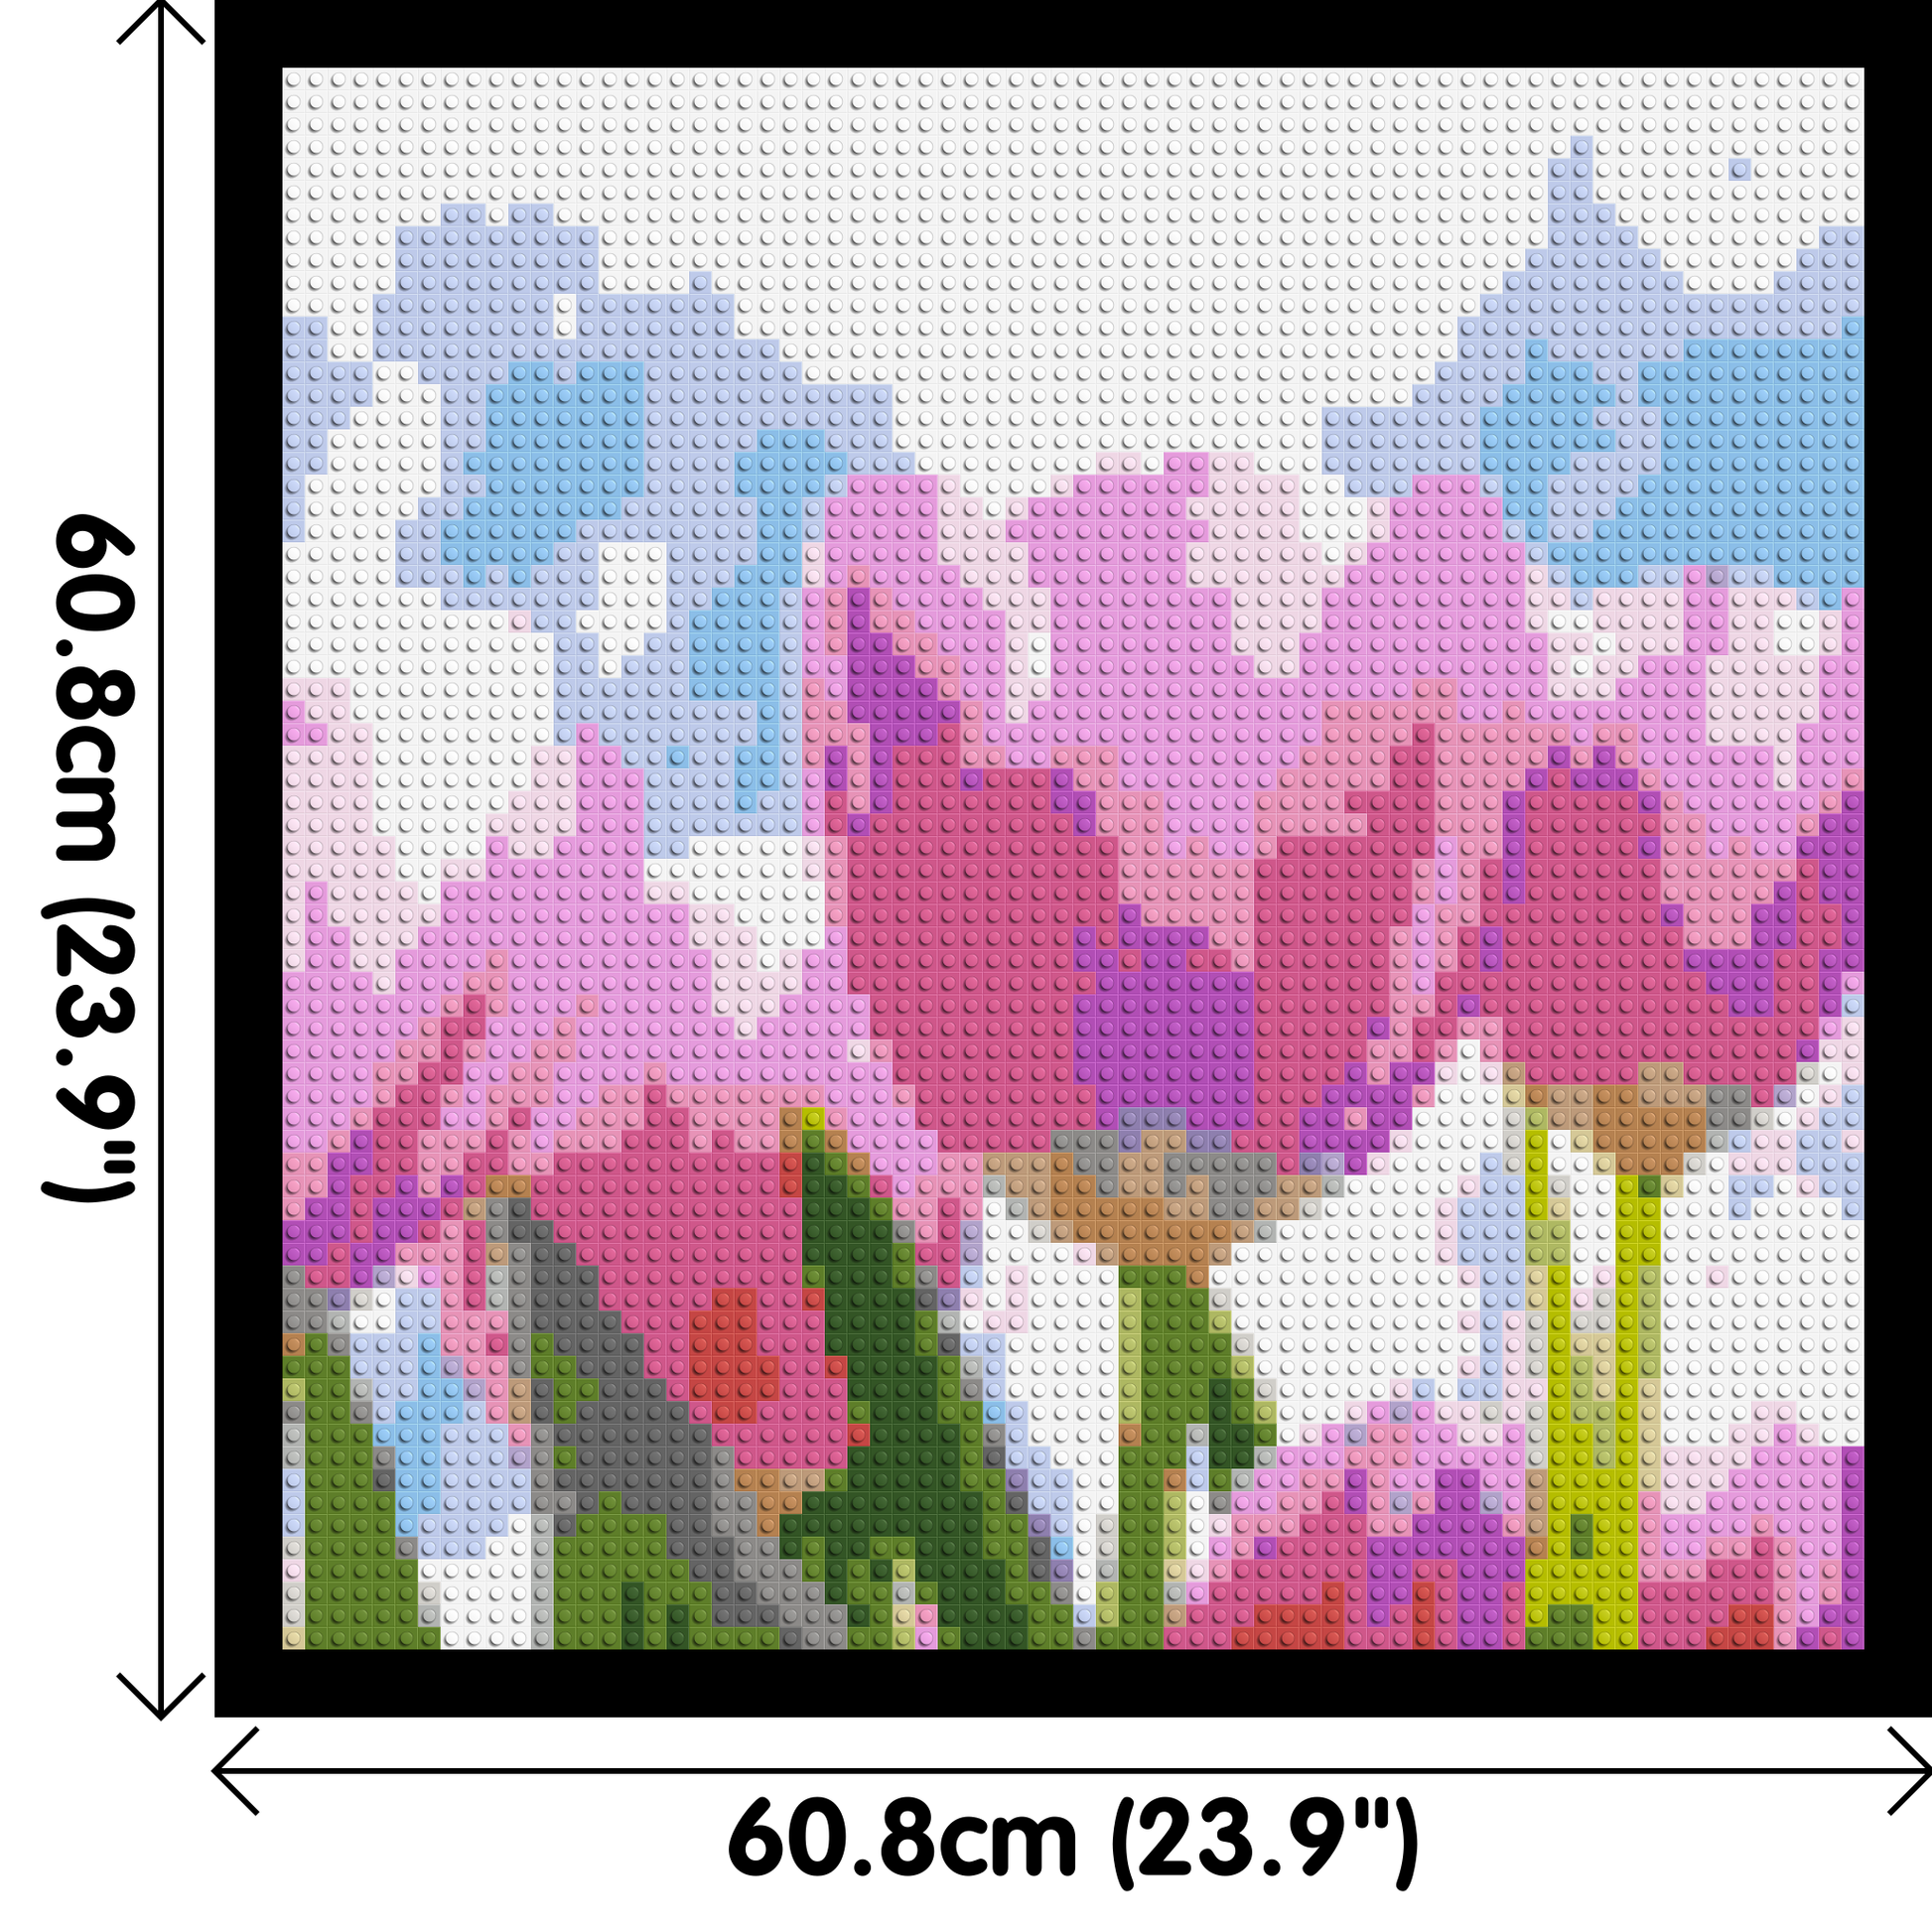 Pink Tulips - Brick Art Mosaic Kit 3x3 dimensions with frame